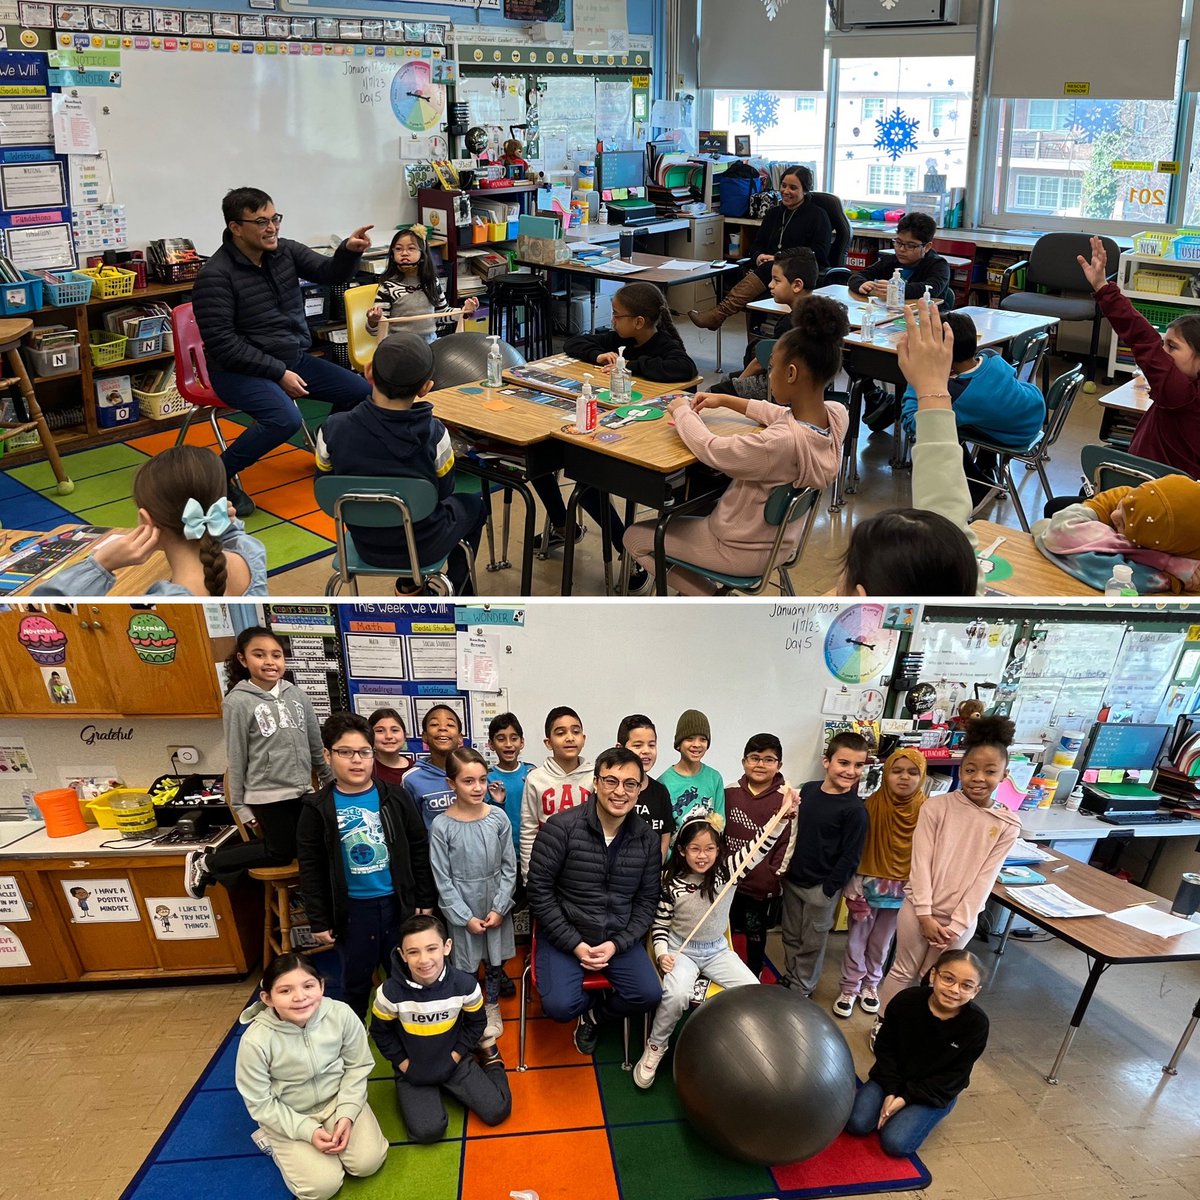 3SF enjoyed learning all about what a physical therapist does and how we can strengthen our bodies, thanks to Dr. Rocco, aka Liana’s dad! #RamCulture #WH @WhufsdRams @stellina8203 @CornwellAveES @Bridiekar @PatriciaScollo3